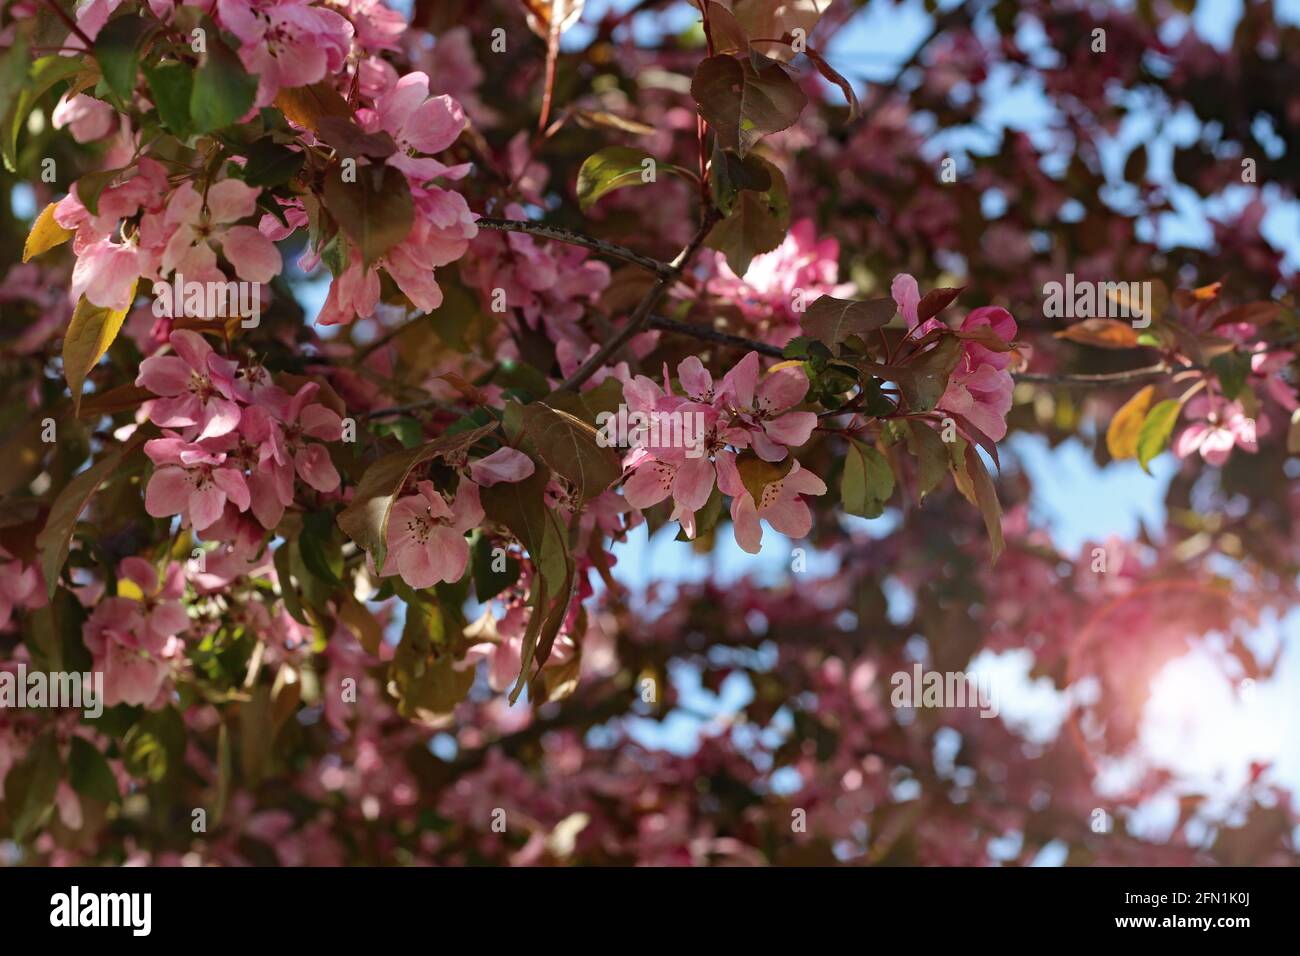 The lovely dark pink flowers of 'malus veitch's scarlet', an ornamental apple tree. Stock Photo